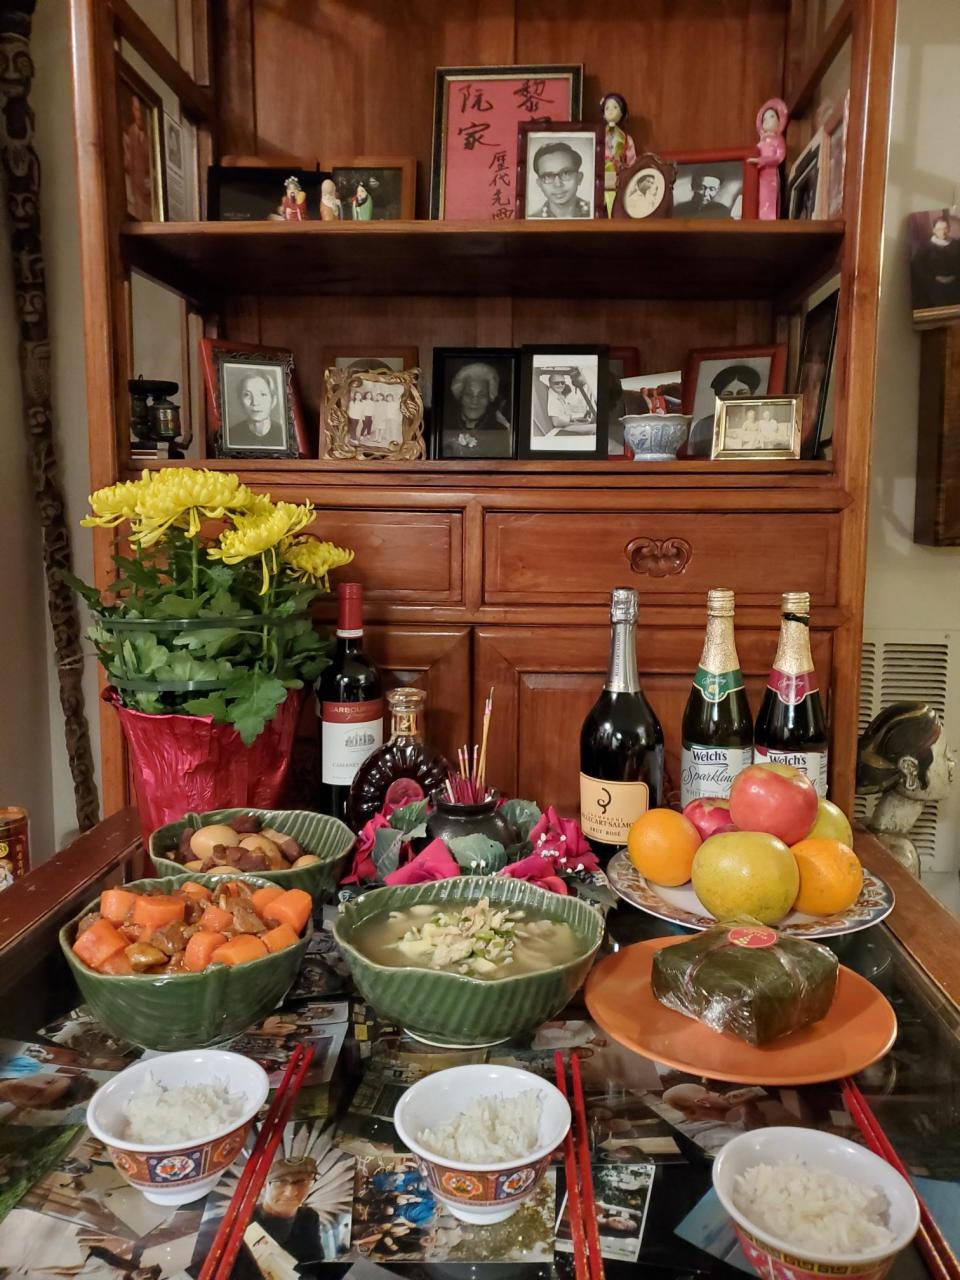 The square “banh chung,” front on the orange plate, is a major Tet dish offered on Thuan Le Elston’s family altar for Lunar New Year’s Eve.